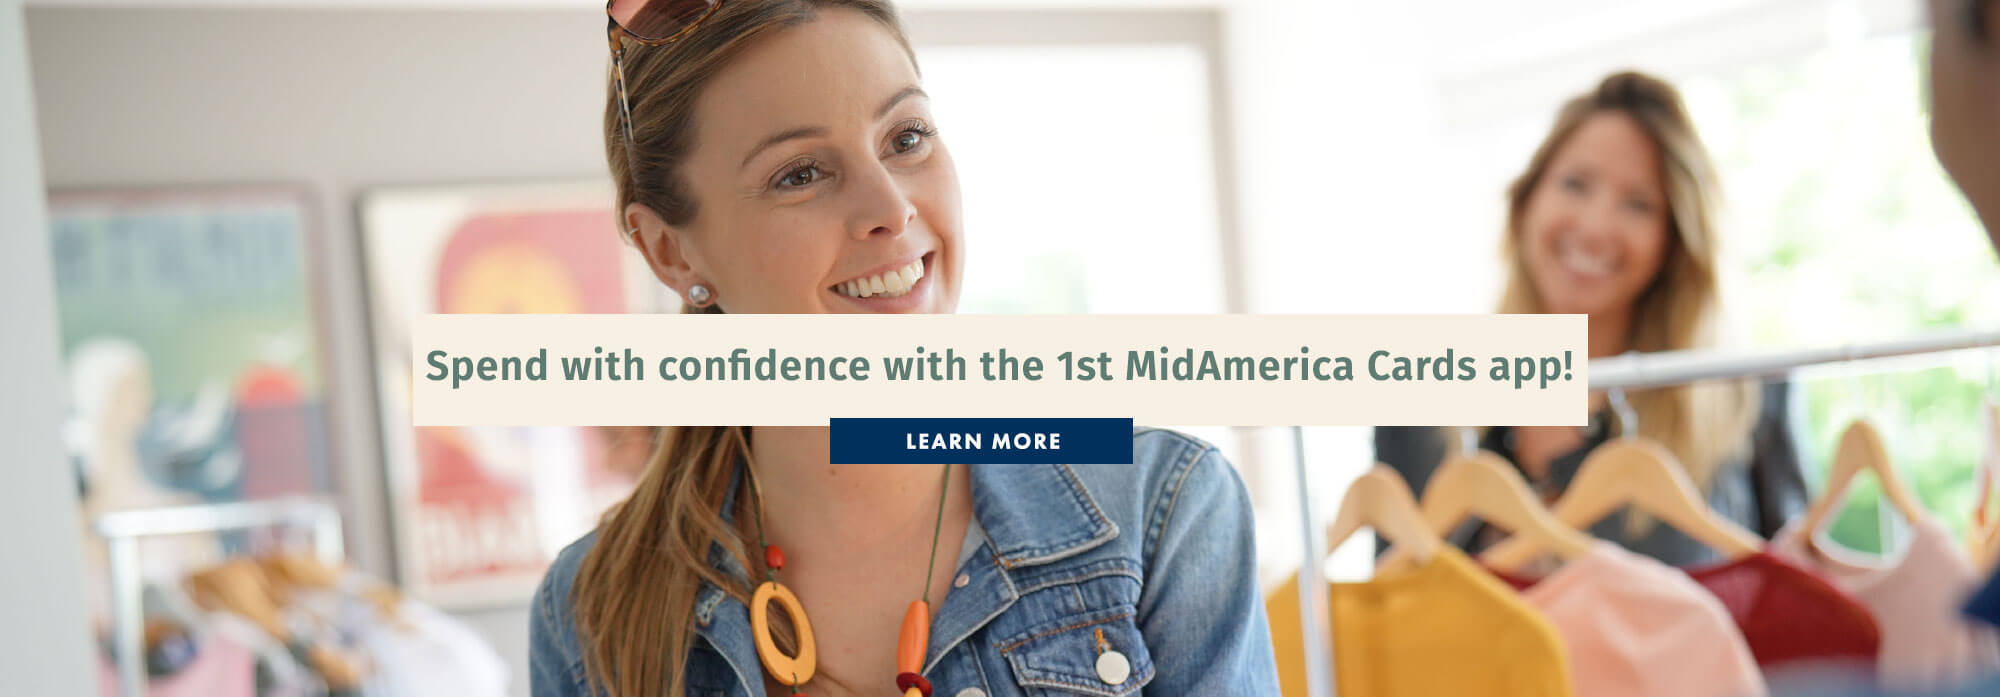 Spend with confidence with the 1st MidAmerica Cards app! Learn more